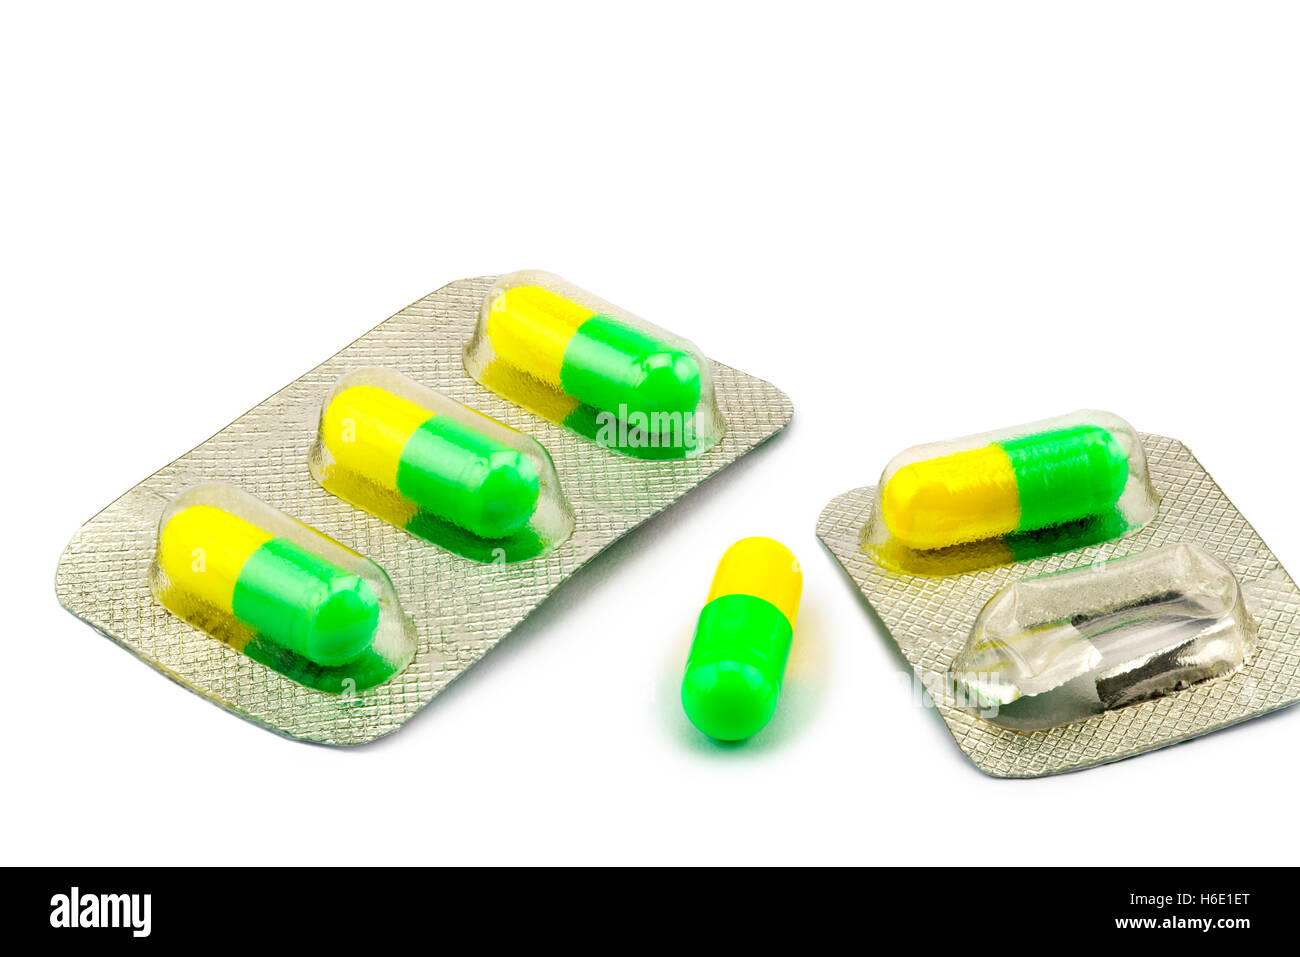 Capsule of antibiotic and packages on white background Stock Photo